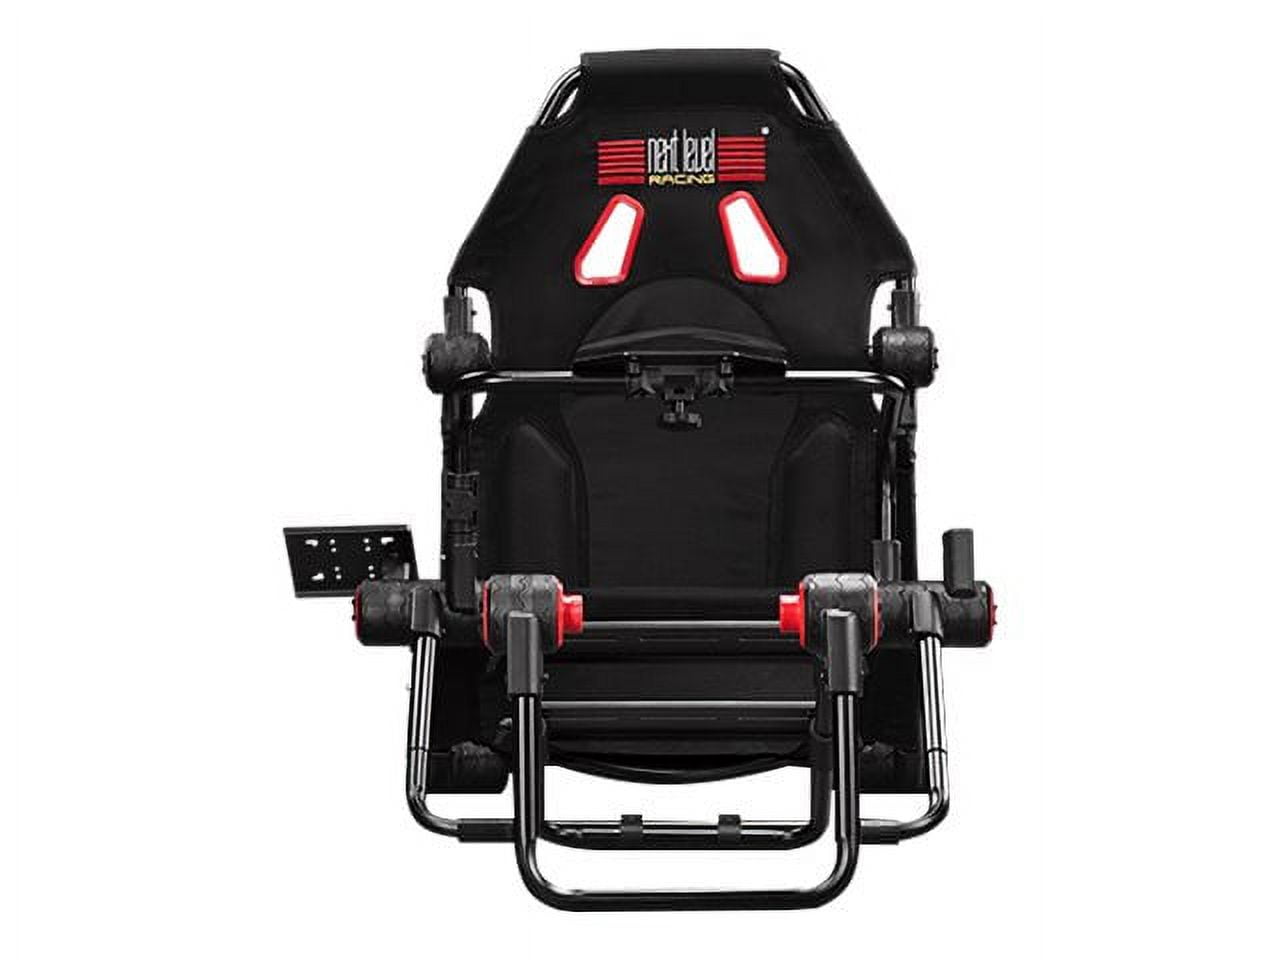 Next Level Racing NLR-S015 F-GT Lite Simulator Cockpit / Gaming Chairs 